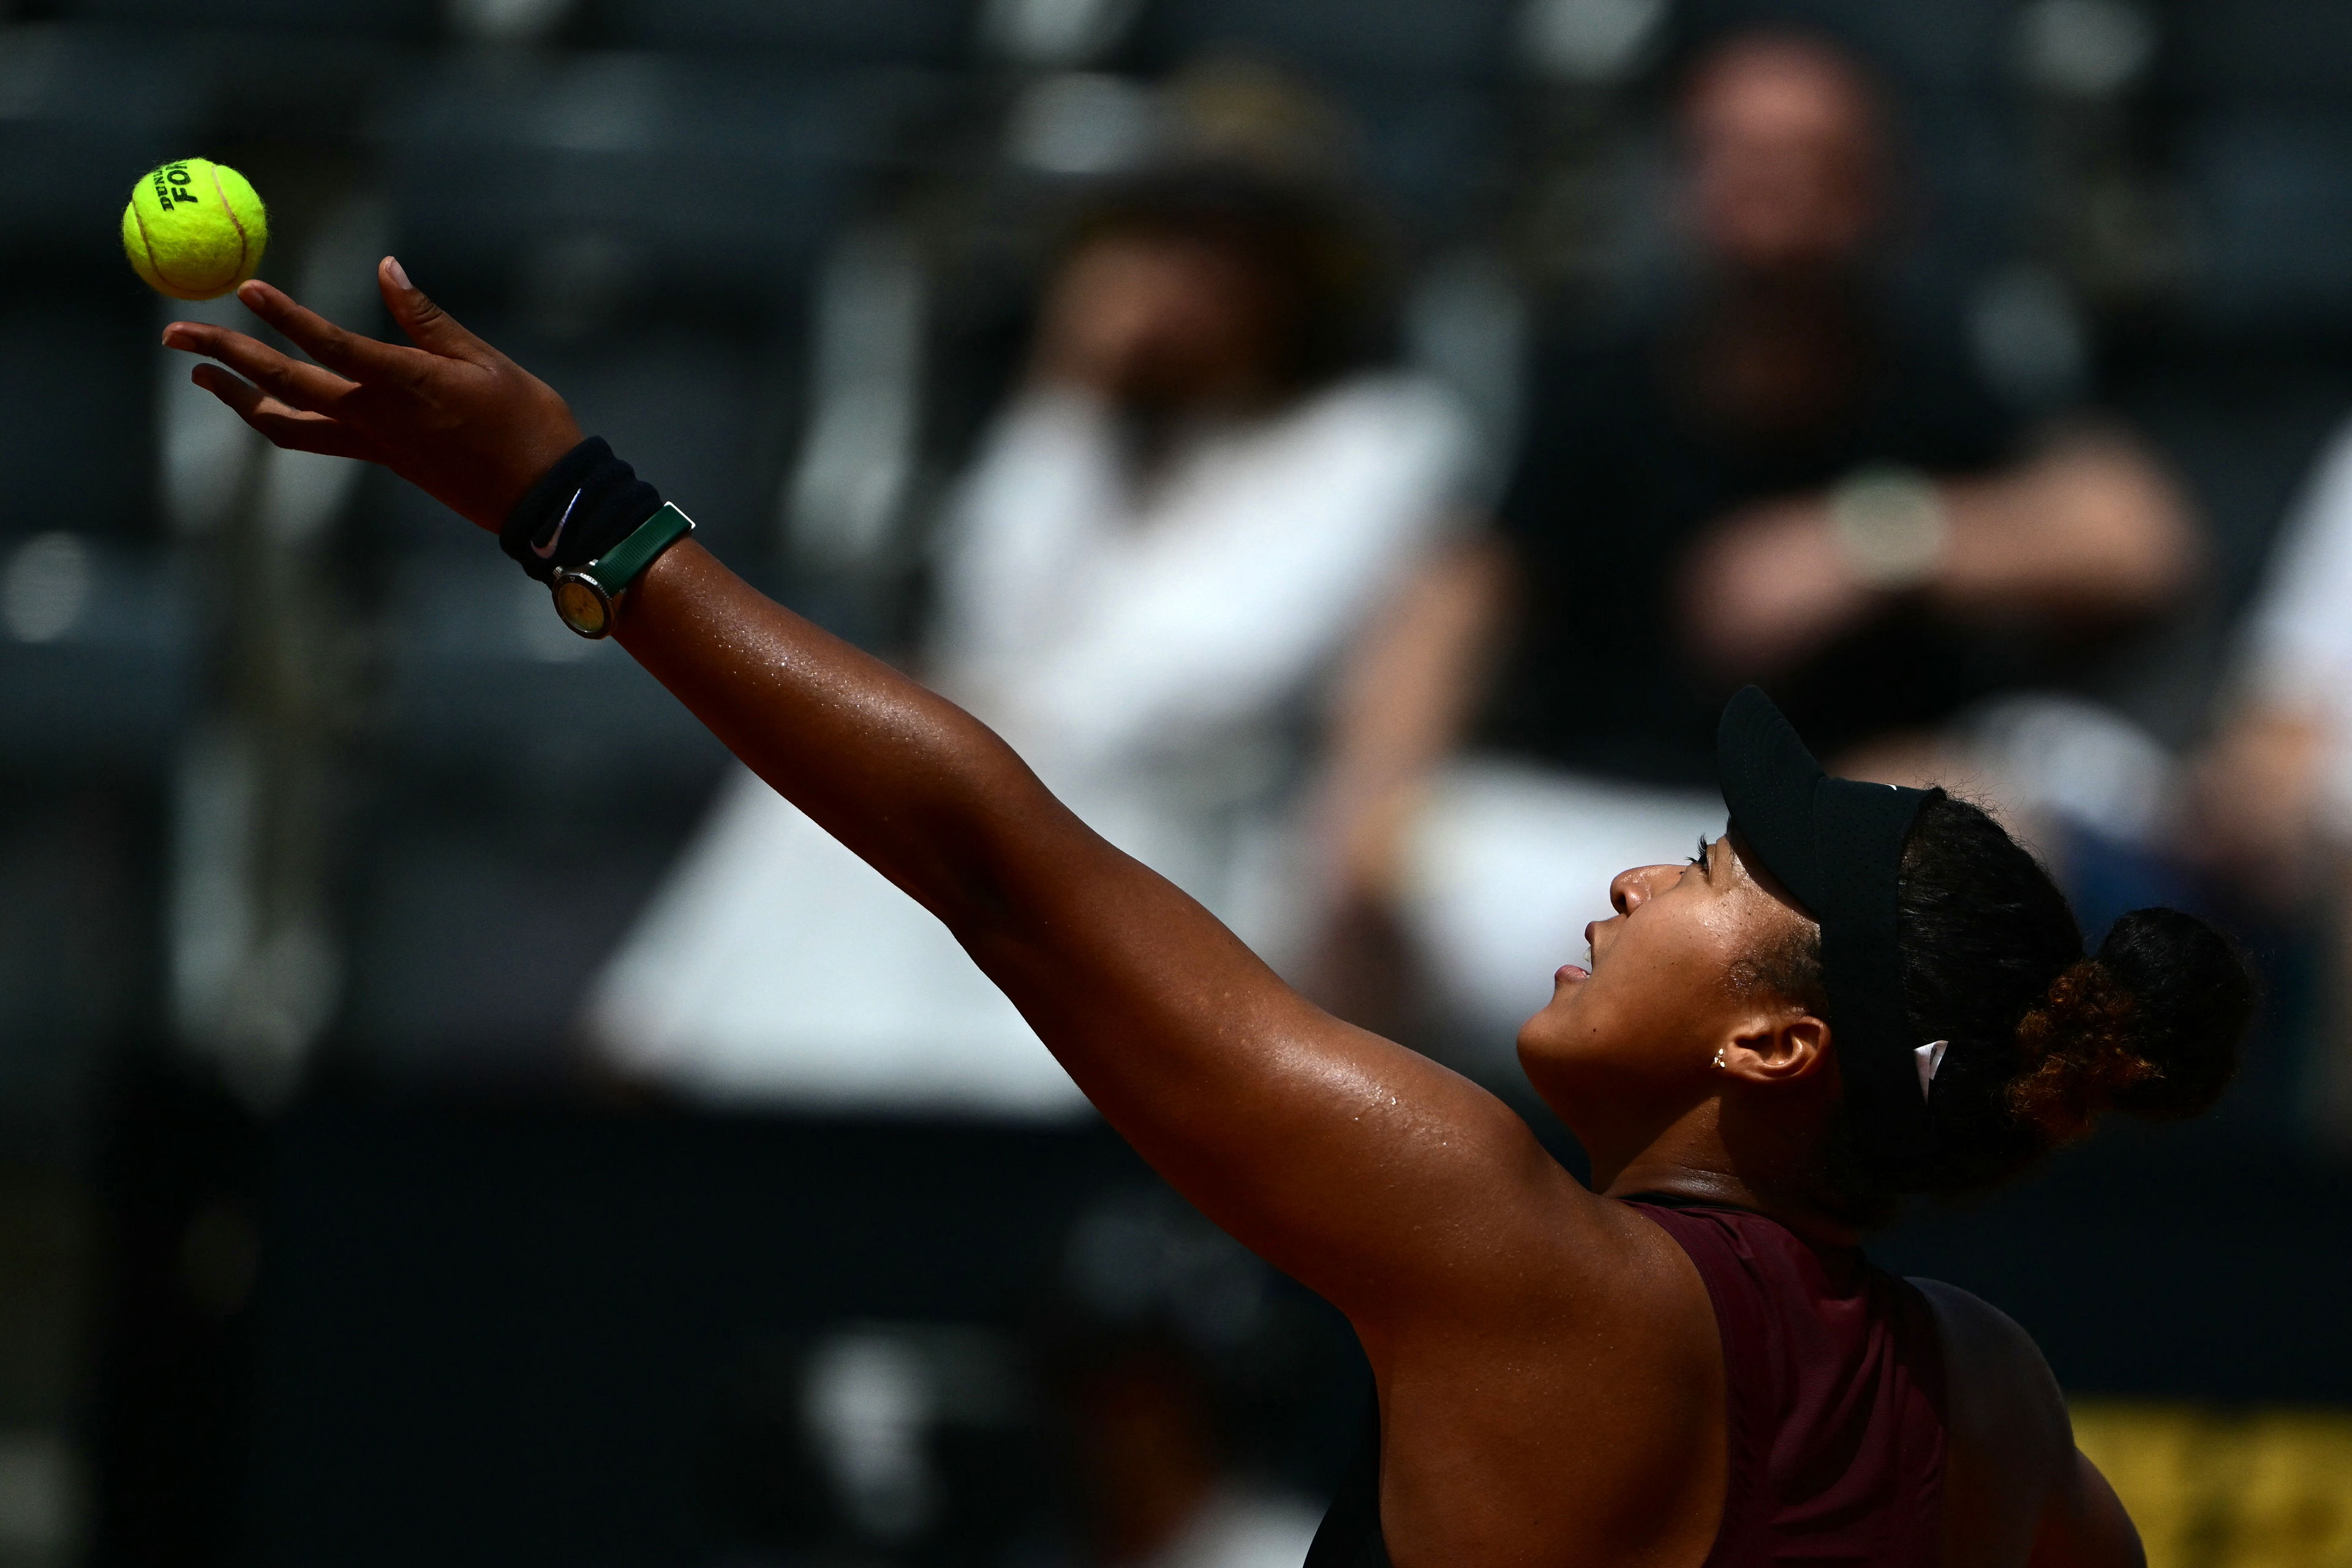 Naomi Osaka listed as executive producer of Belgian film ahead of Cannes premiere